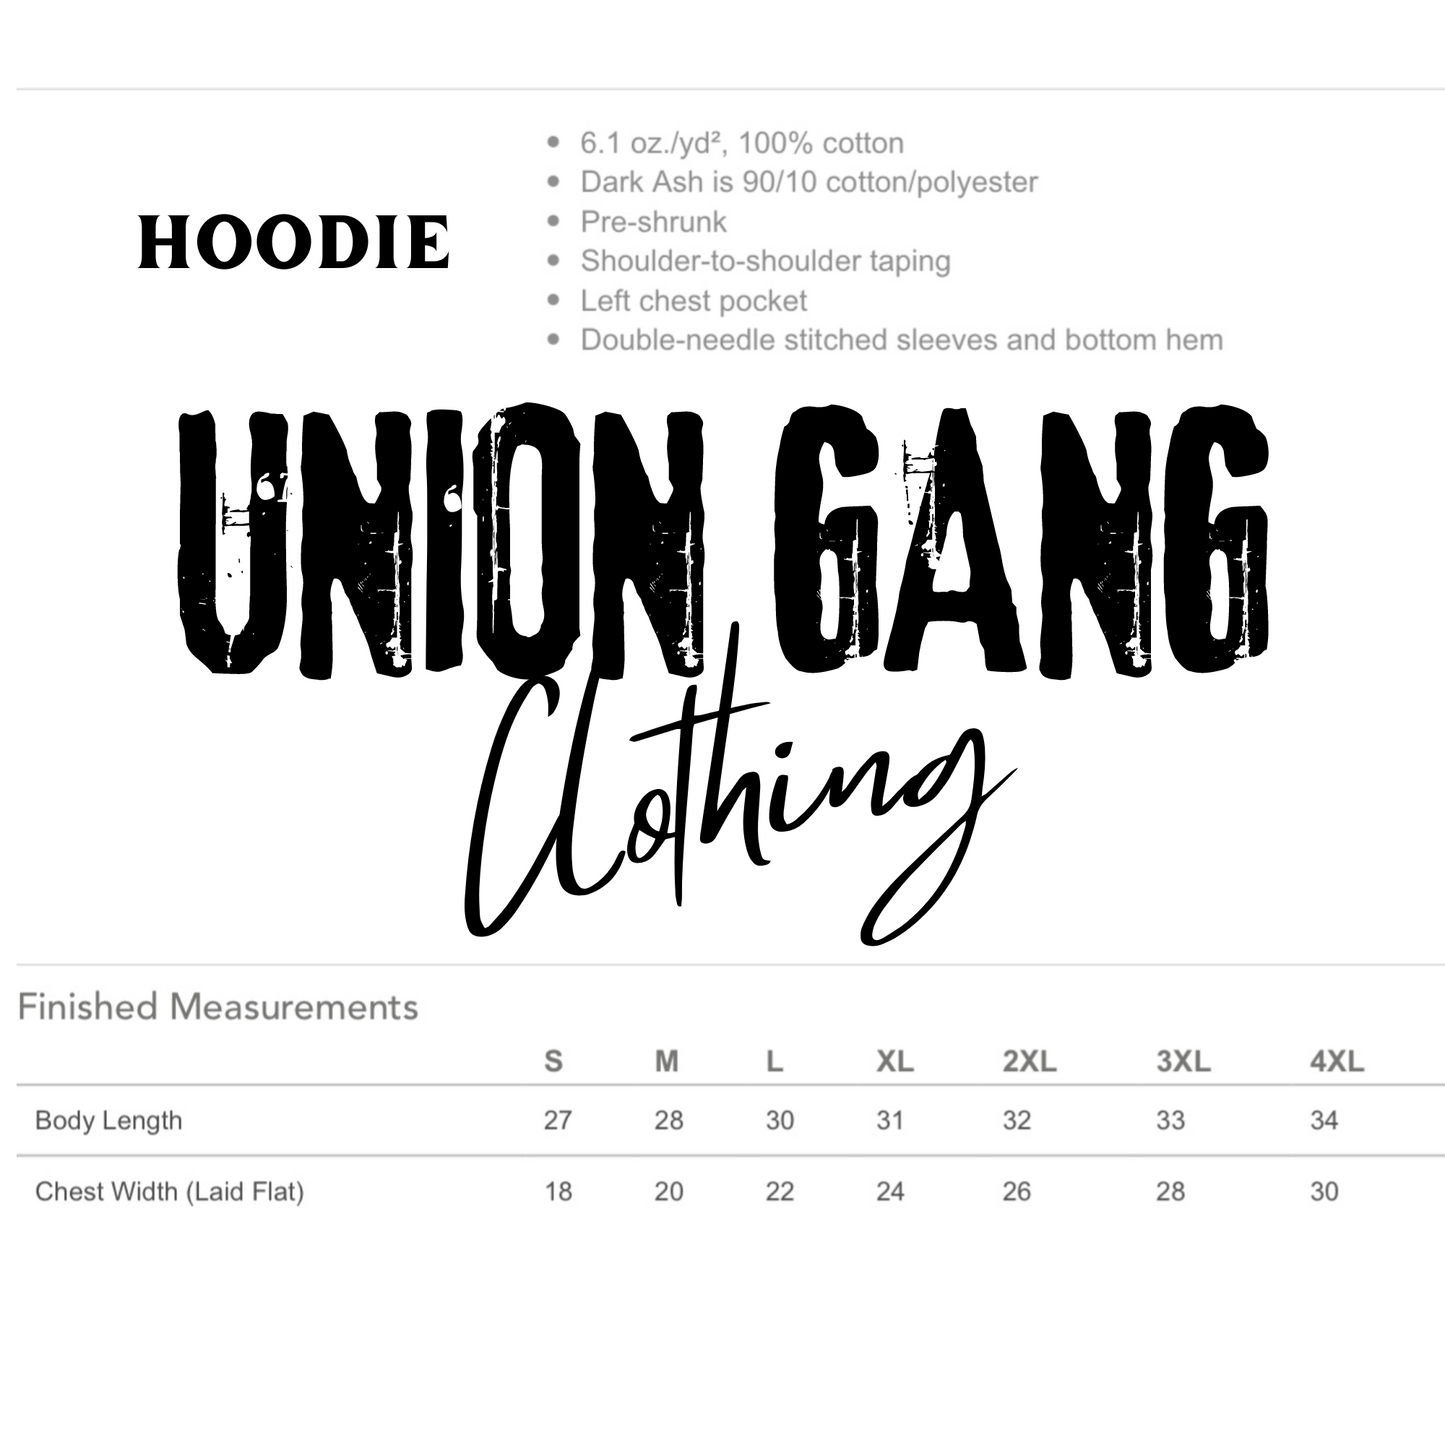 CLOSING SWITCH HOODIE